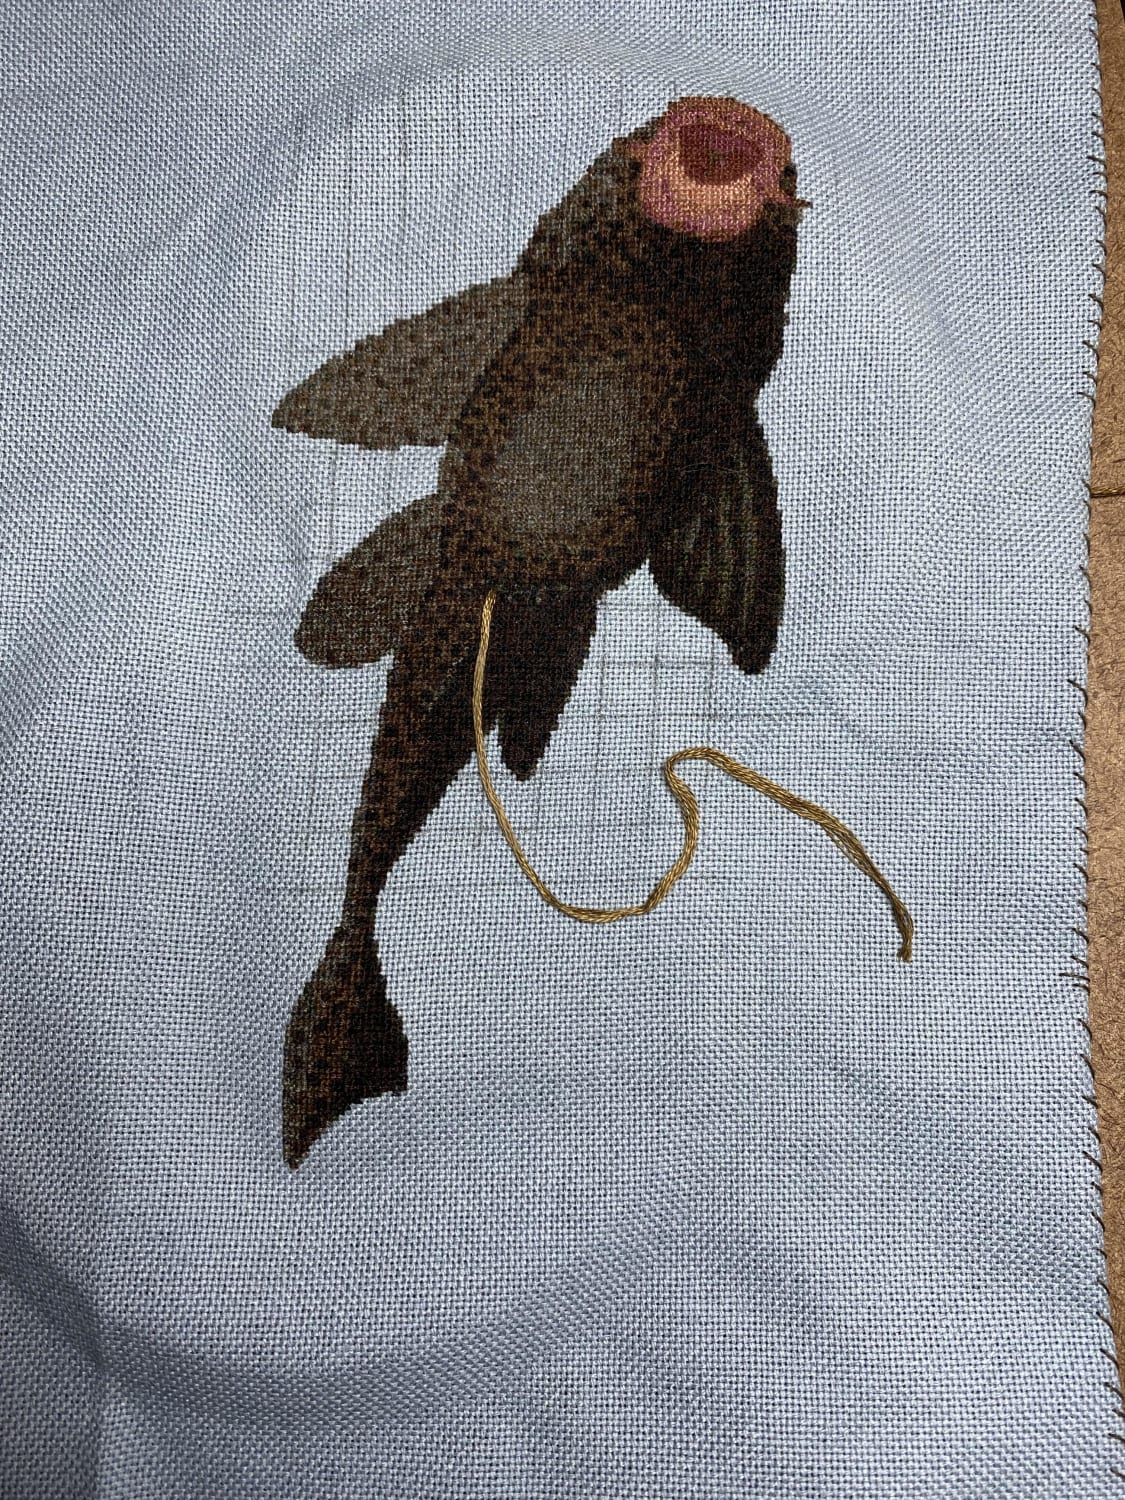 [FO] Self Drafted Pattern, Finished my plecostomus sucking on the glass (and pooping). Now to clean and frame!